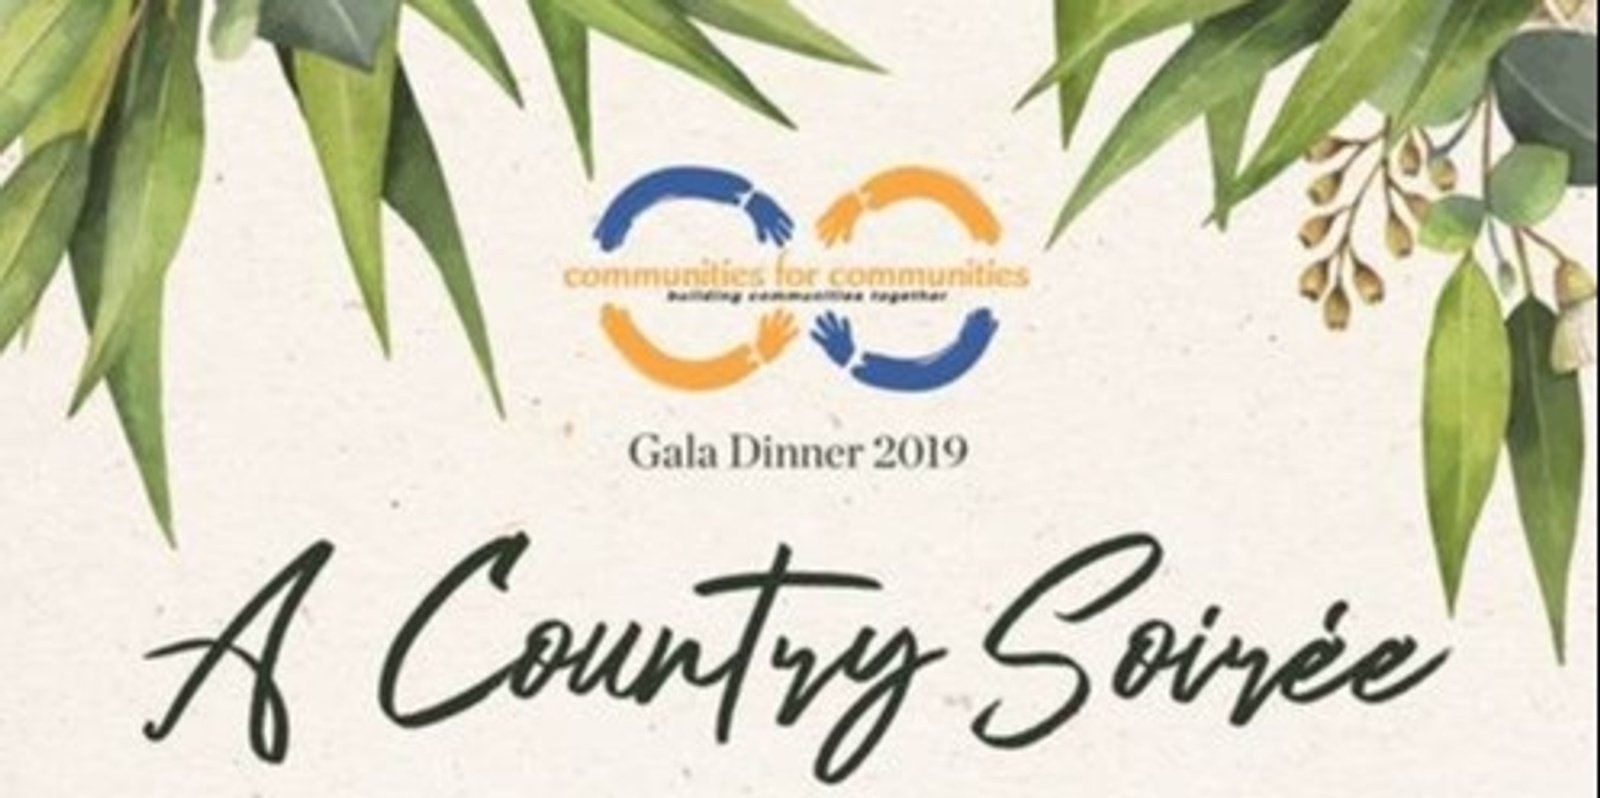 Banner image for "A Country Soiree" - C4C's 2019 Gala Dinner